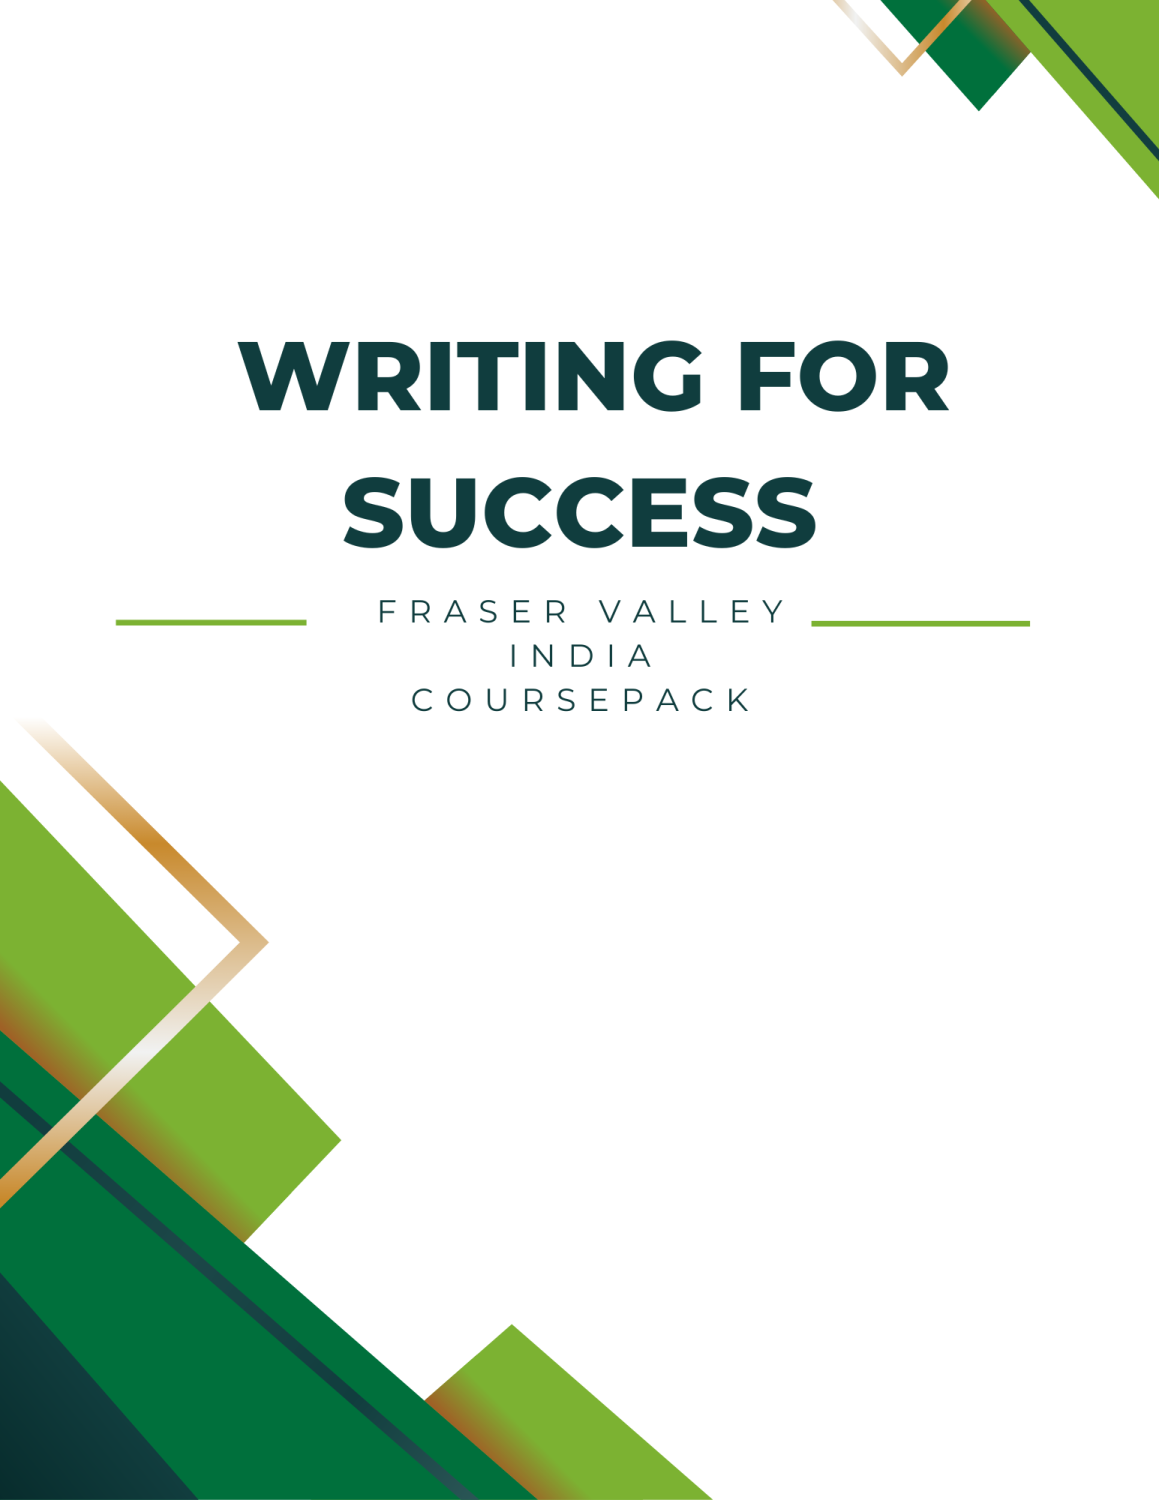 Cover image for Fraser Valley India's Writing for Success for LMS